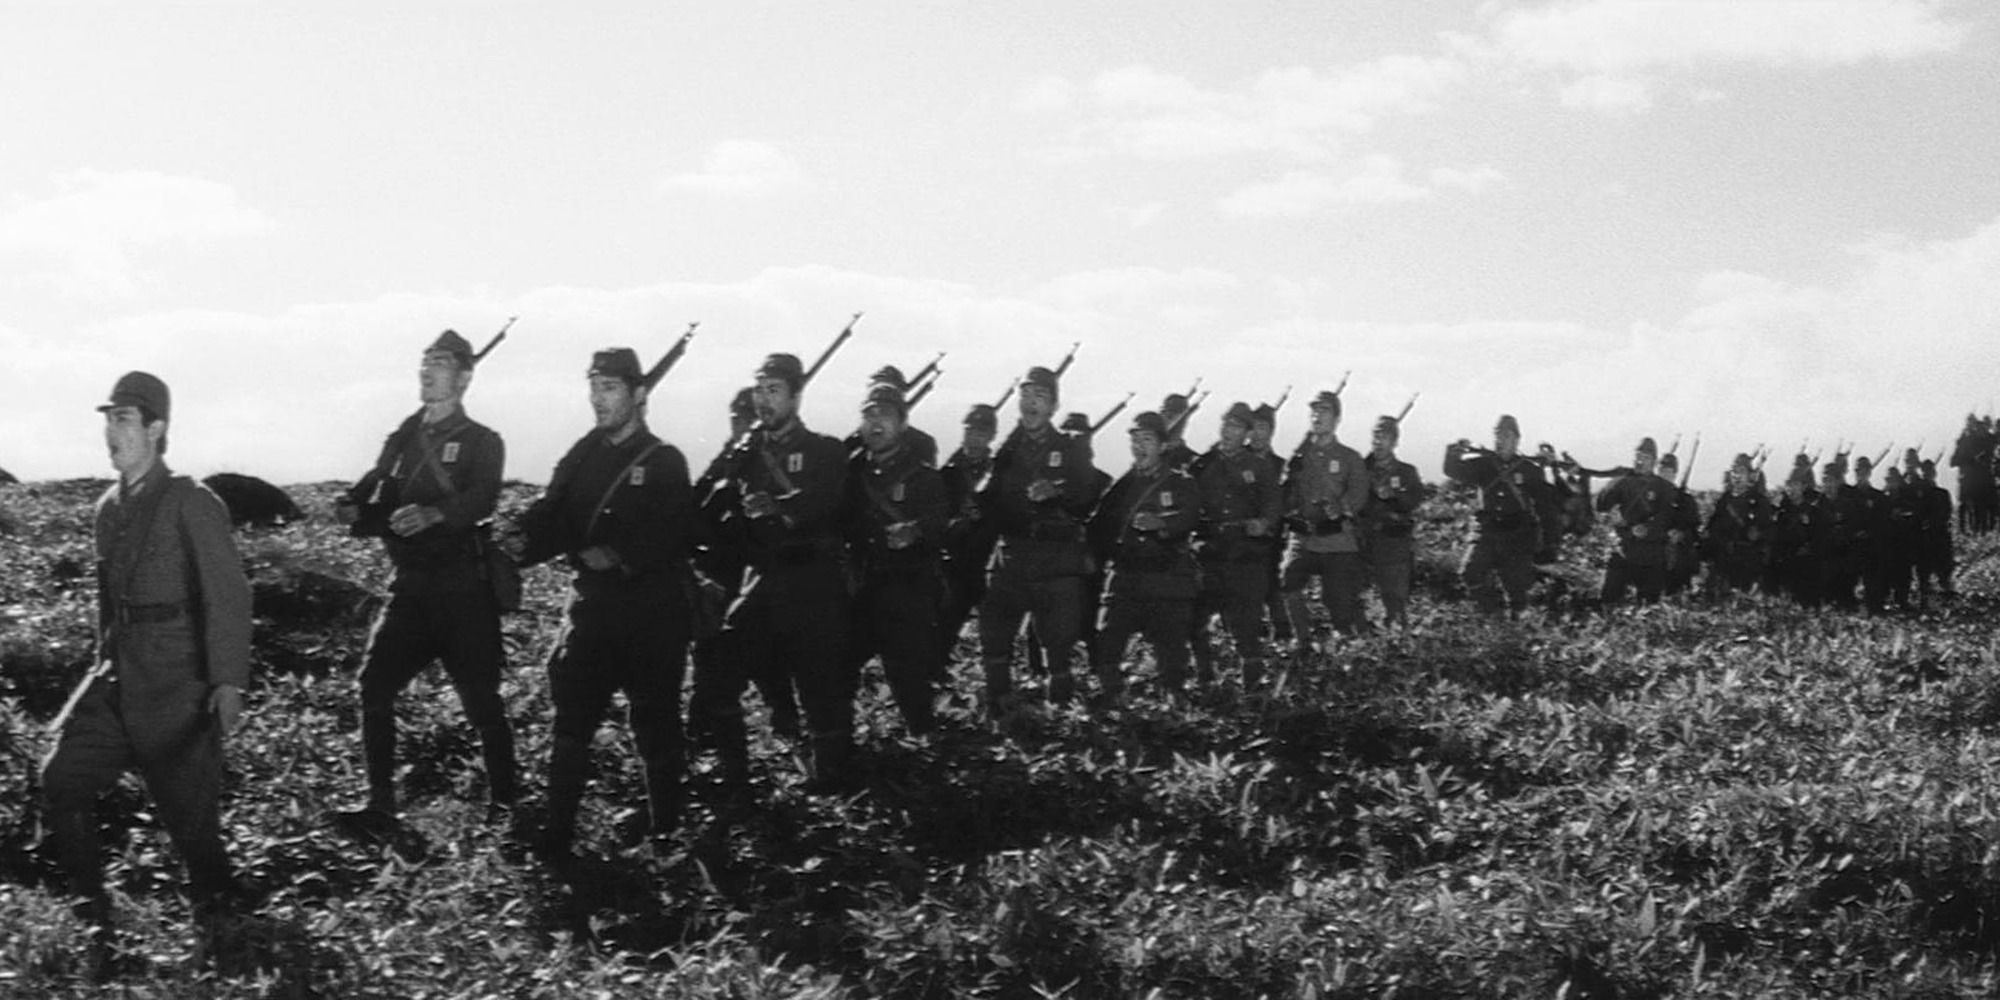 Soldiers marching across a grassy field in 'The Human Condition II: Road to Eternity'